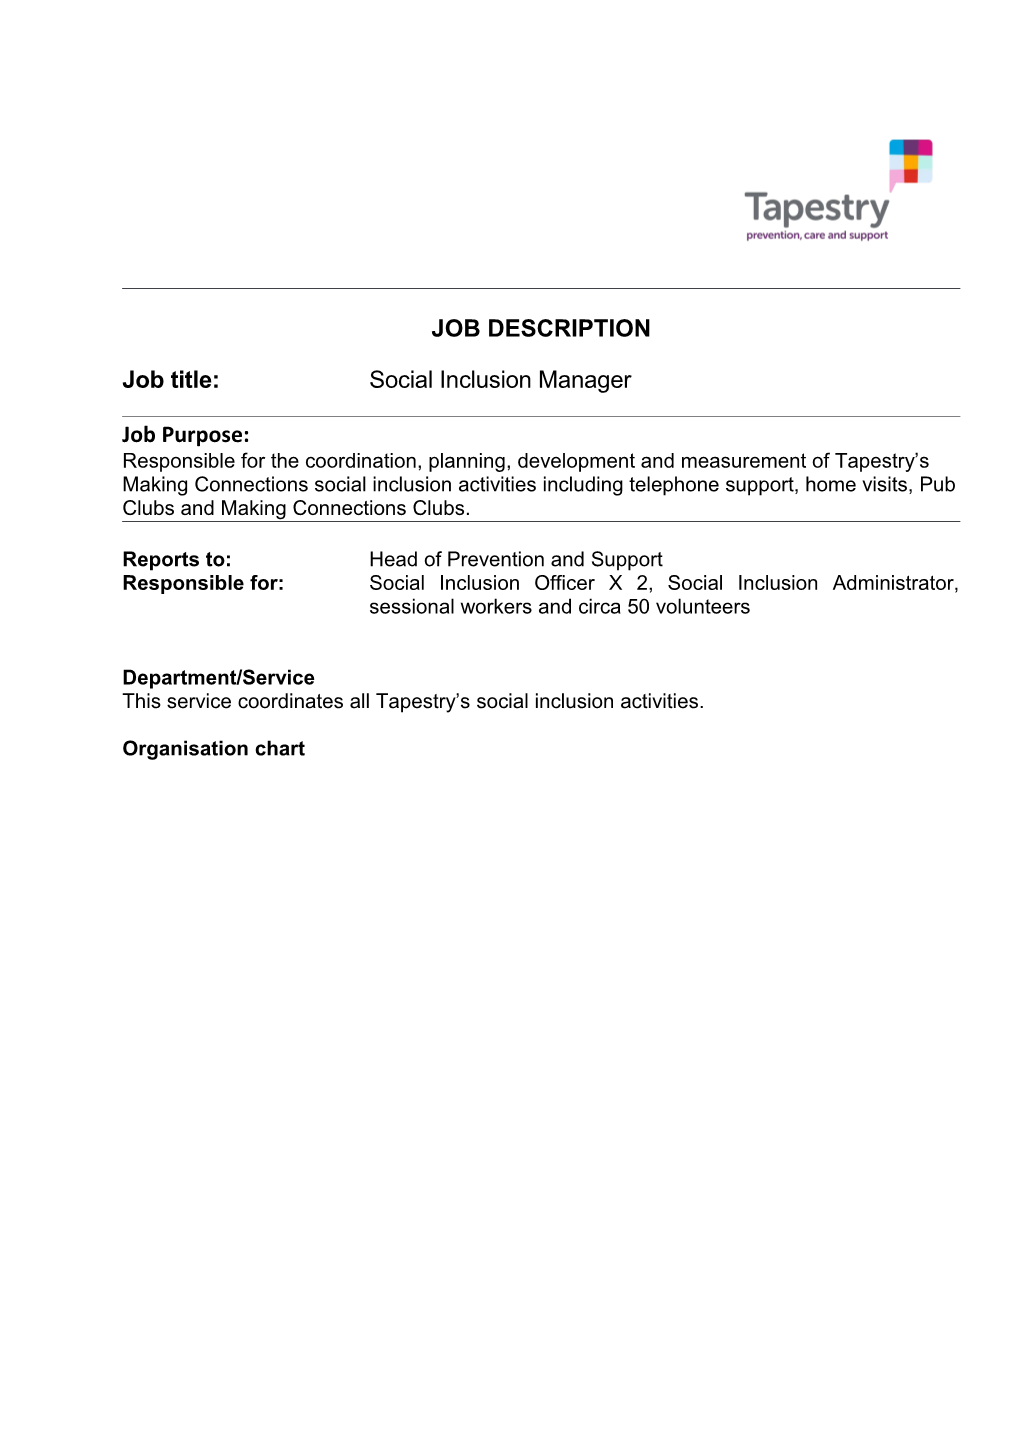 Job Title: Social Inclusion Manager